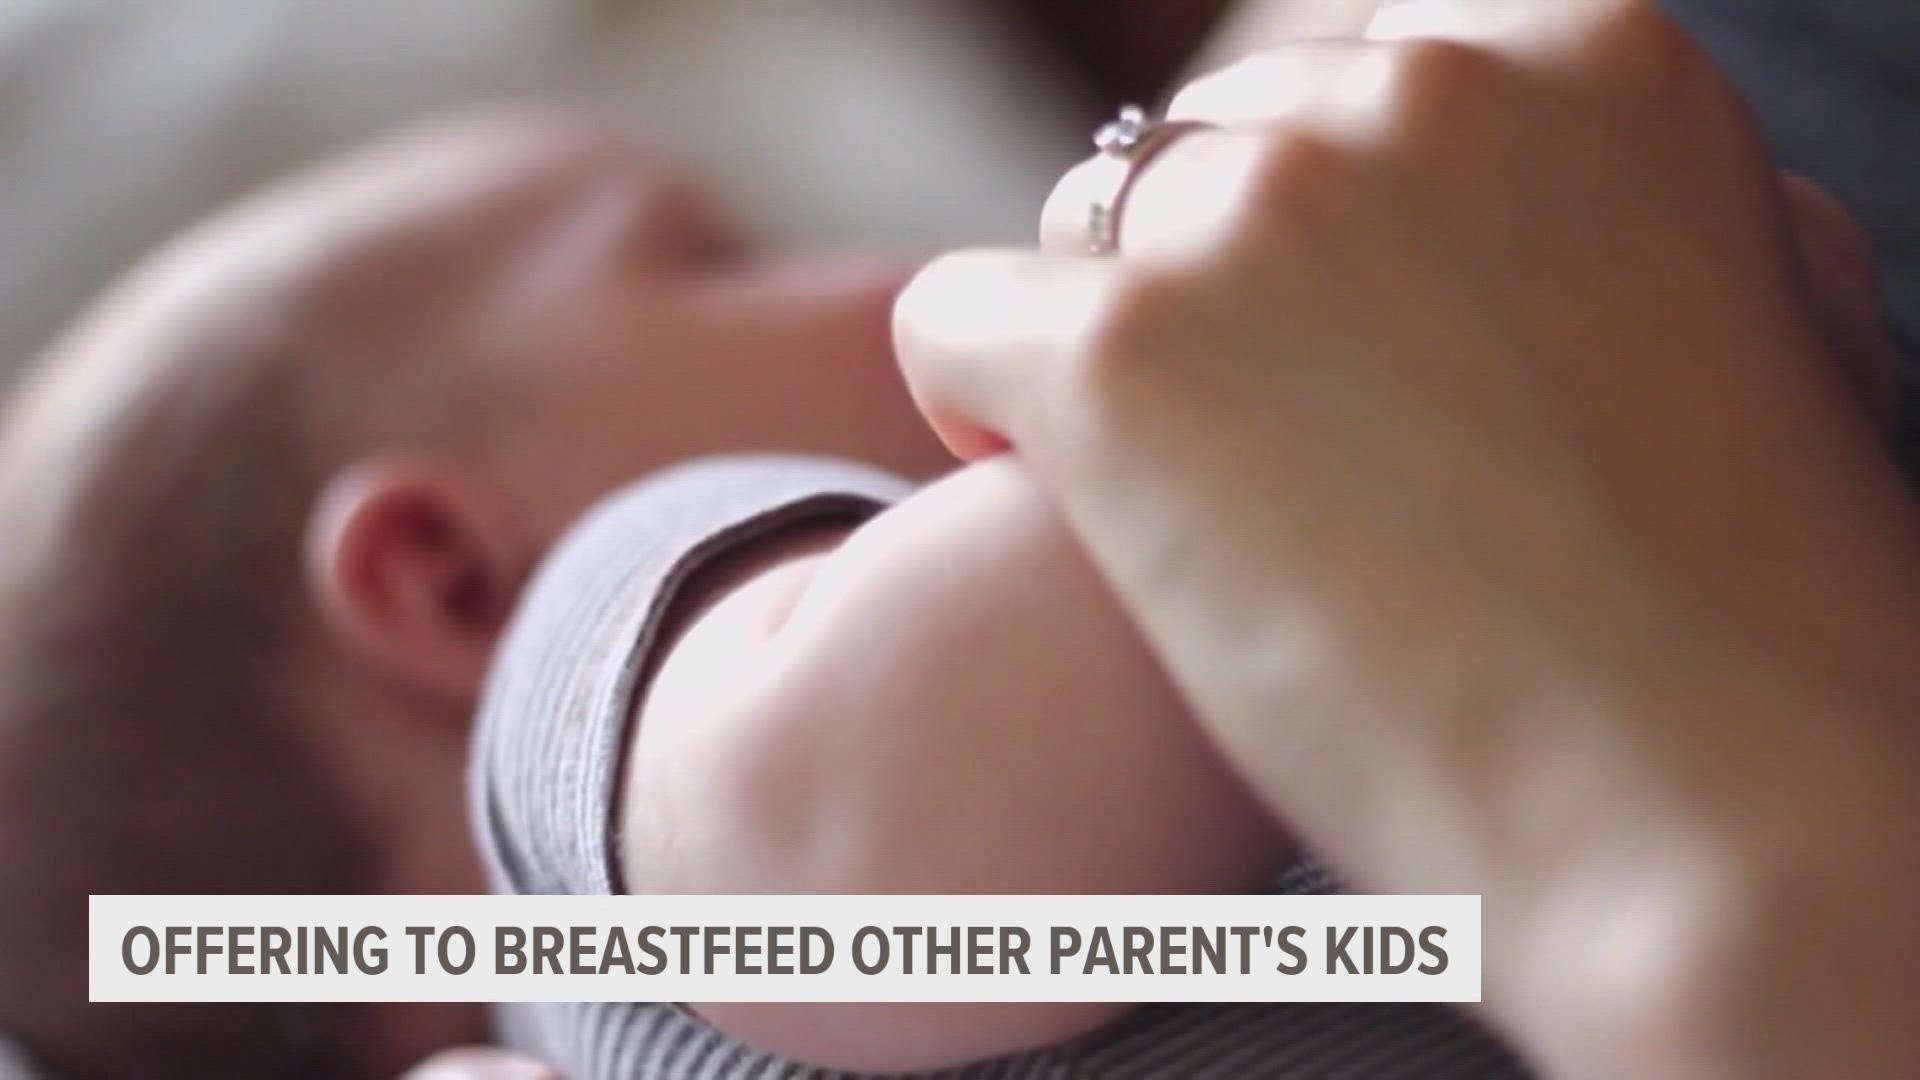 A metro mom is offering to breastfeed other people's babies as the hunt for baby formula continues.